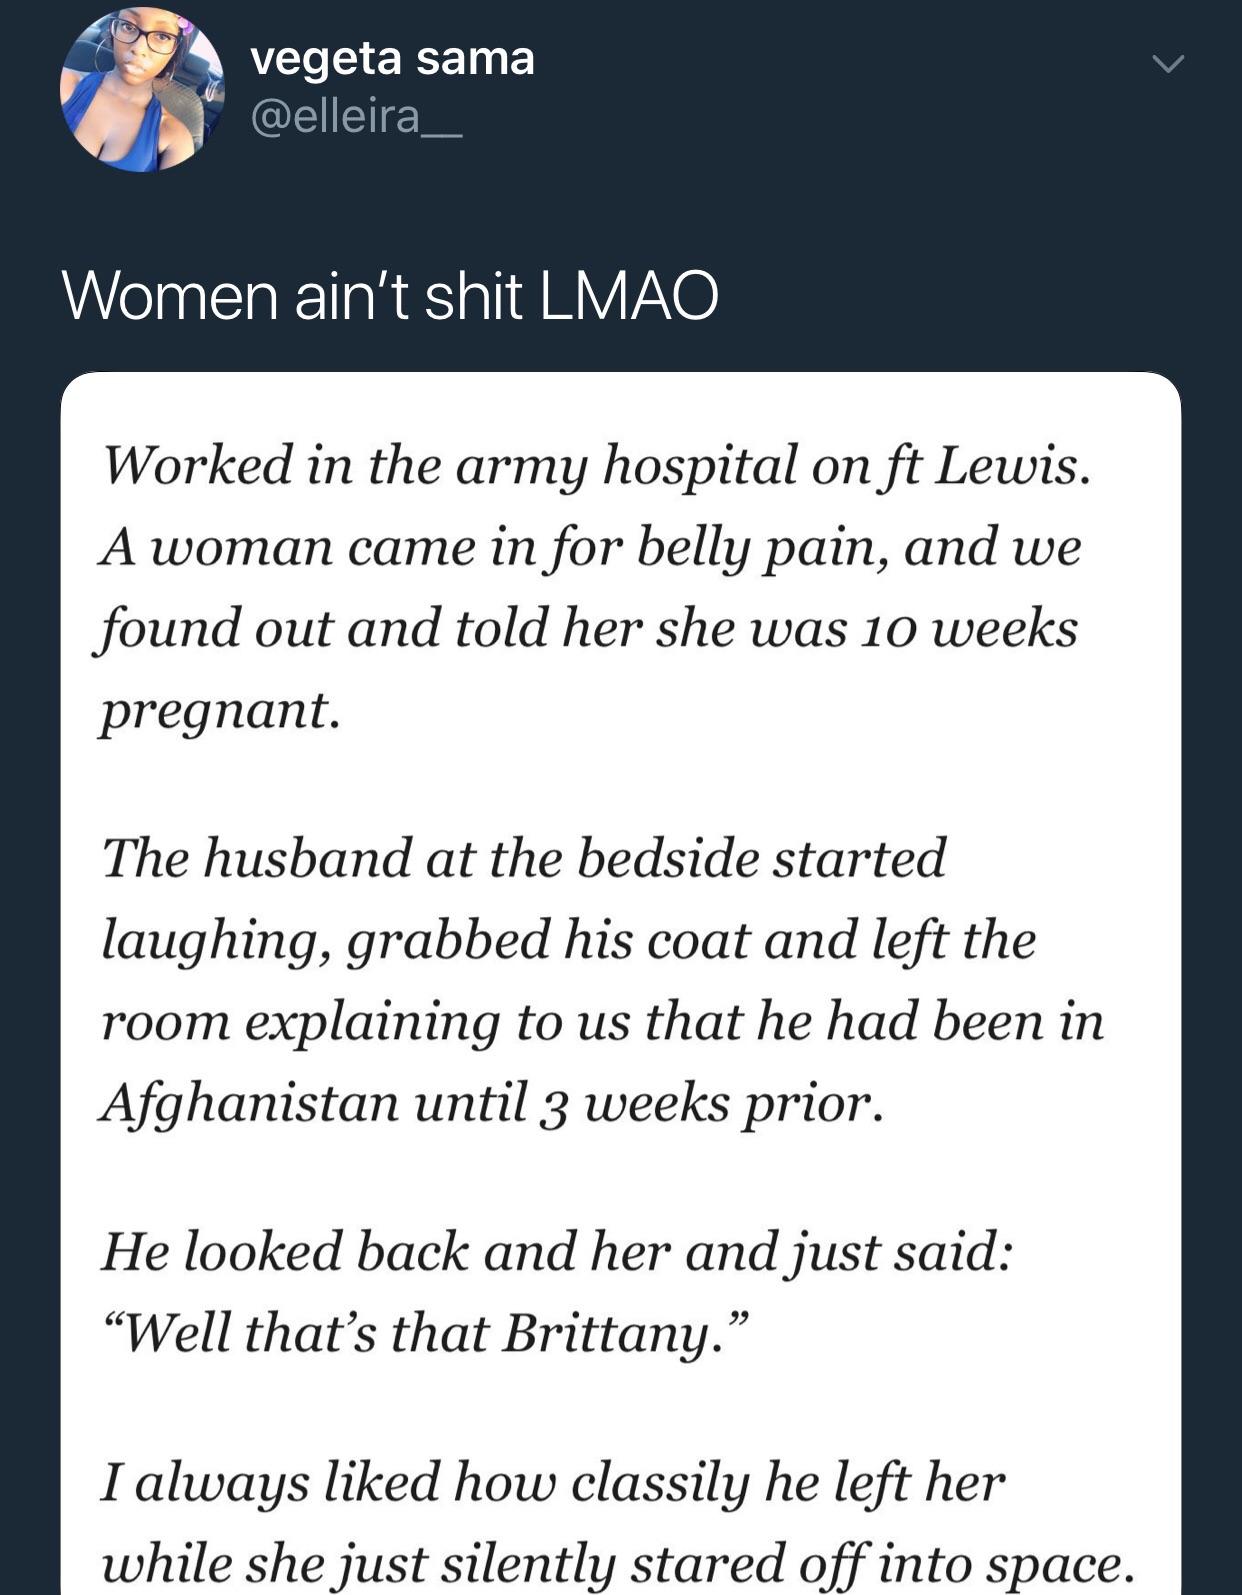 meme document - vegeta sama Women ain't shit Lmao Worked in the army hospital on ft Lewis. A woman came in for belly pain, and we found out and told her she was 10 weeks pregnant. The husband at the bedside started laughing, grabbed his coat and left the 